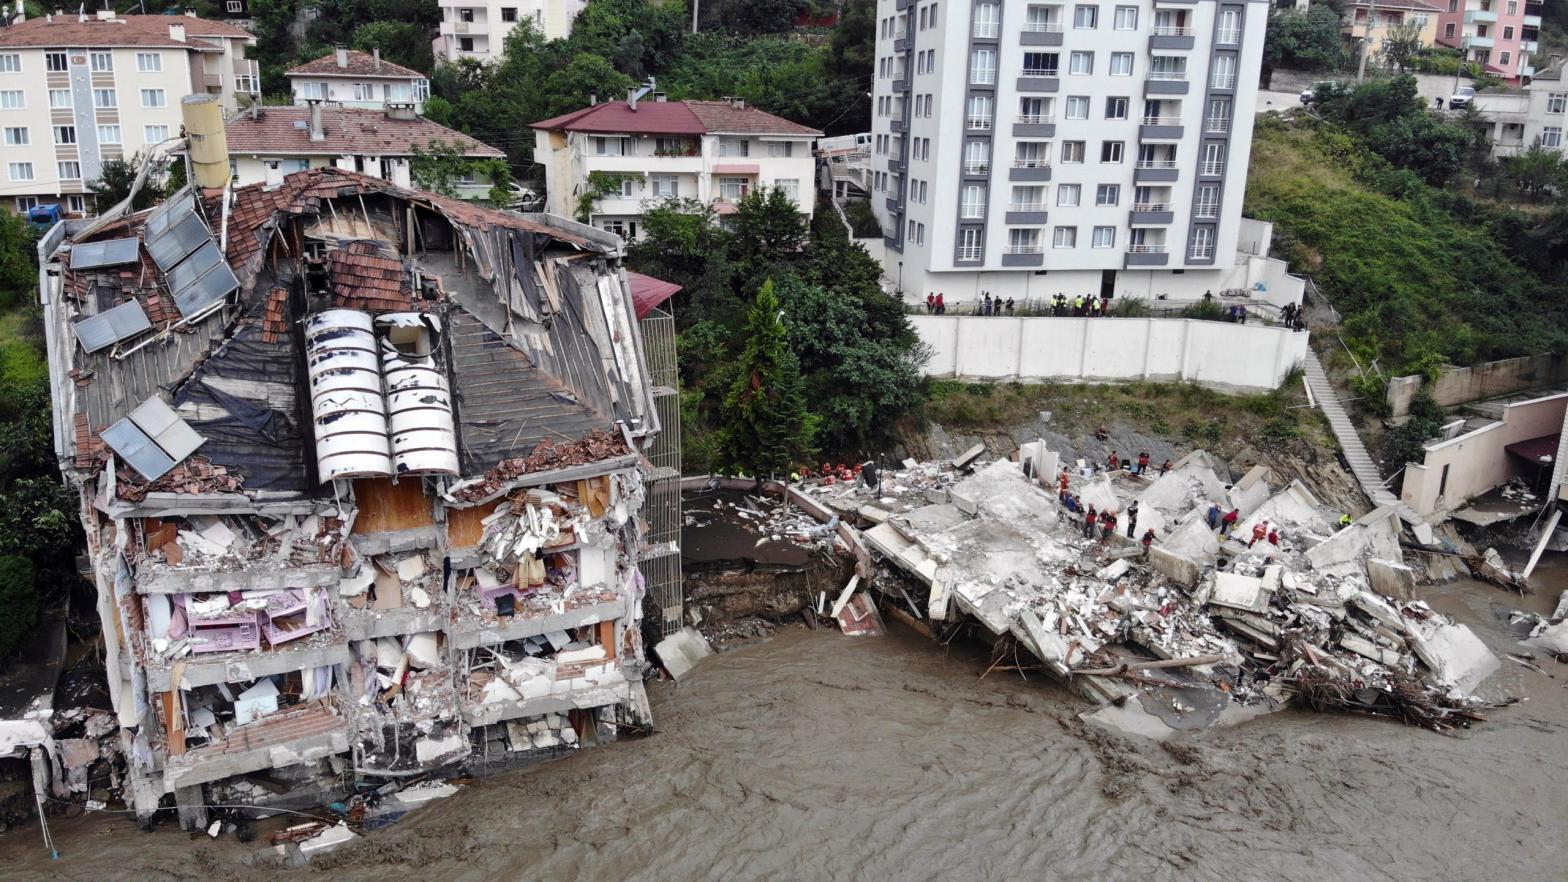 An aerial photo shows the destruction after floods and mudslides killed about three dozens of people, in Bozkurt town of Kastamonu province, Turkey, Friday, Aug. 13, 2021. (Photo: AP, AP)